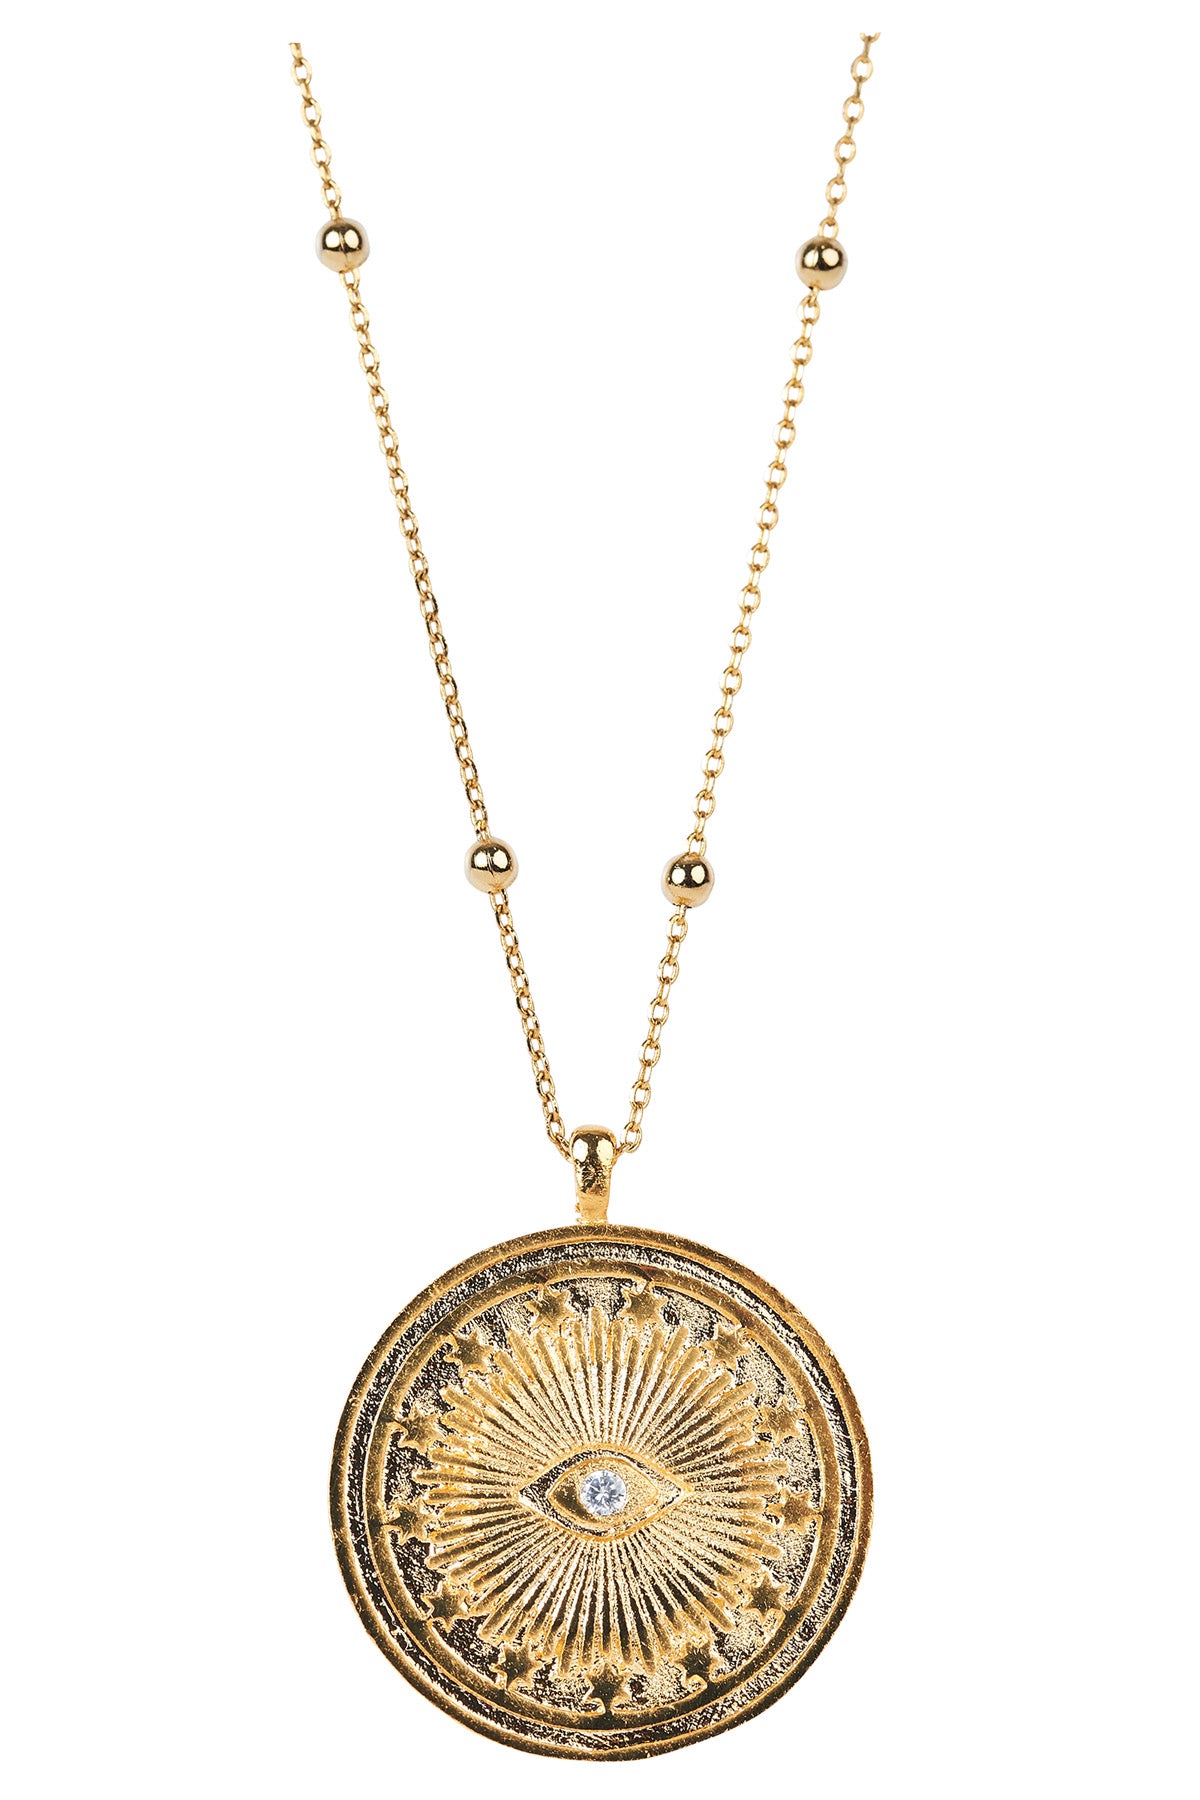 Legacy Necklace - Watch Over Me - eb&ive Necklace